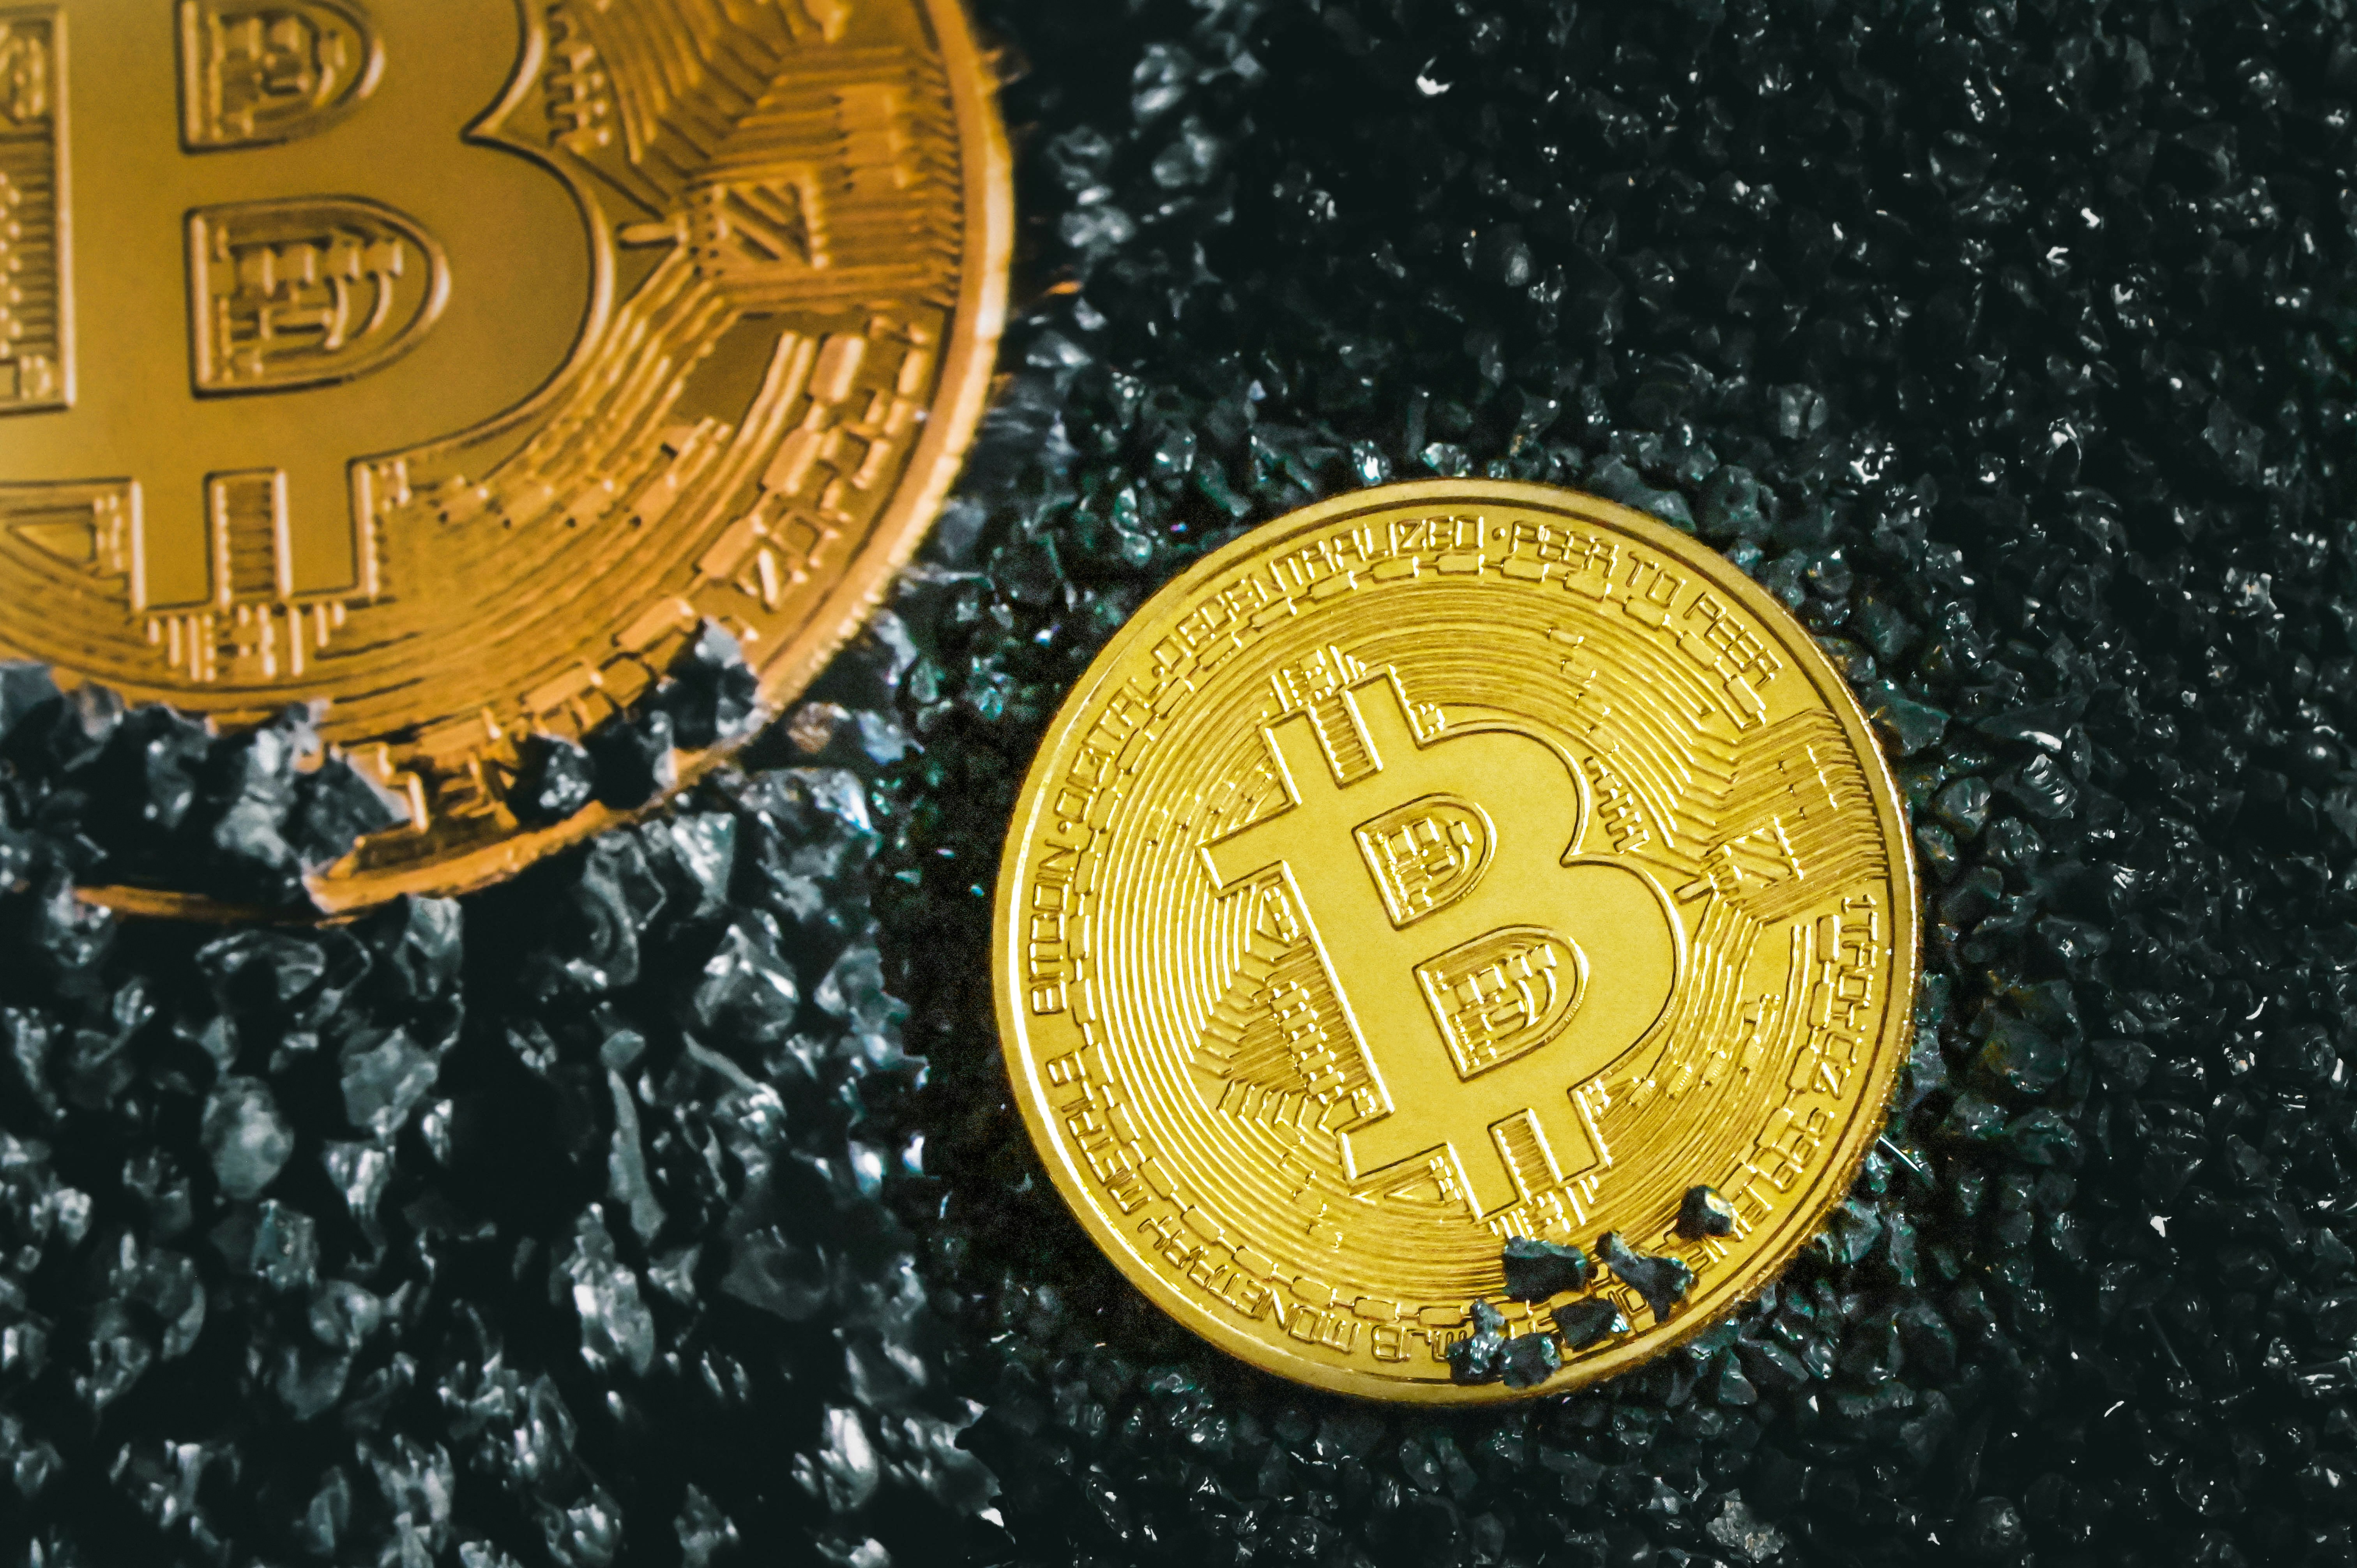 Two Bitcoins placed on black stones